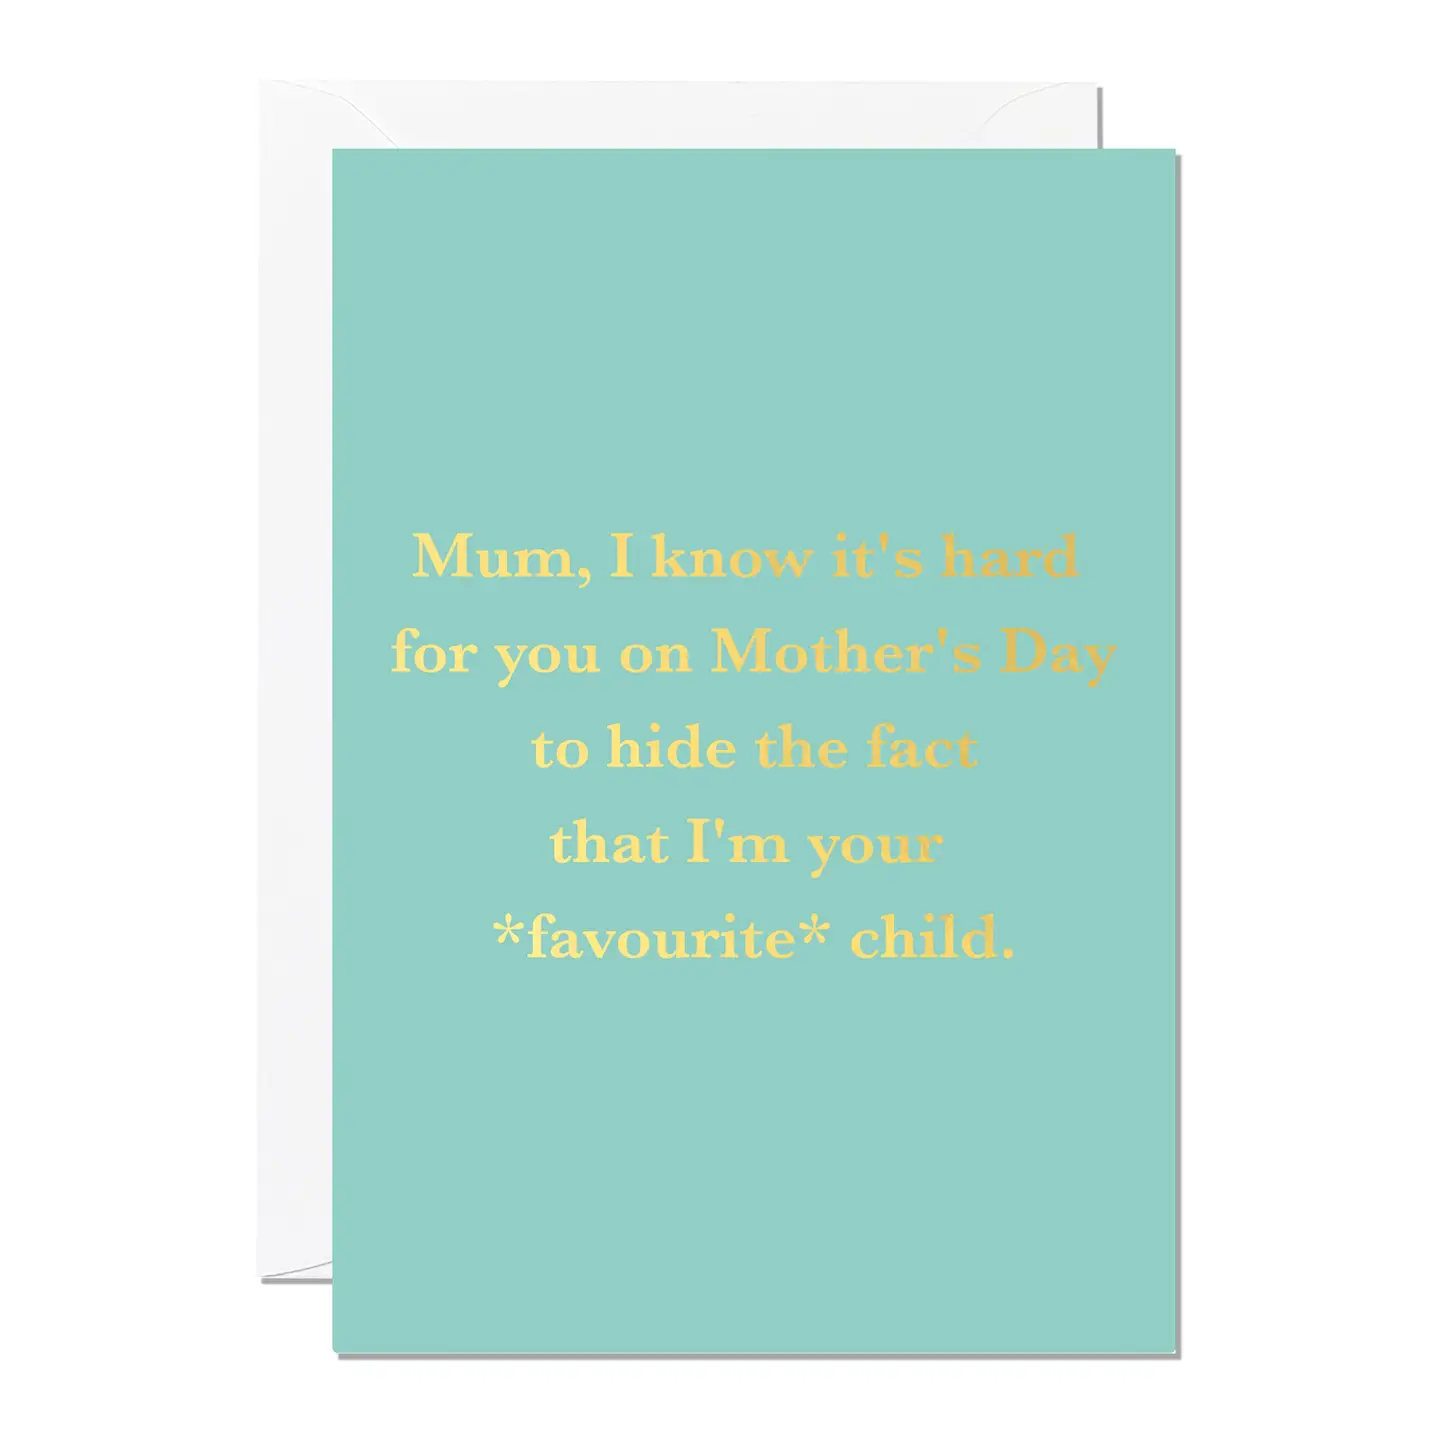 Teal background, with gold embossed words Mum, I know its hard for you on Mothers Day to hide the fact that I'm your favourite child. Card